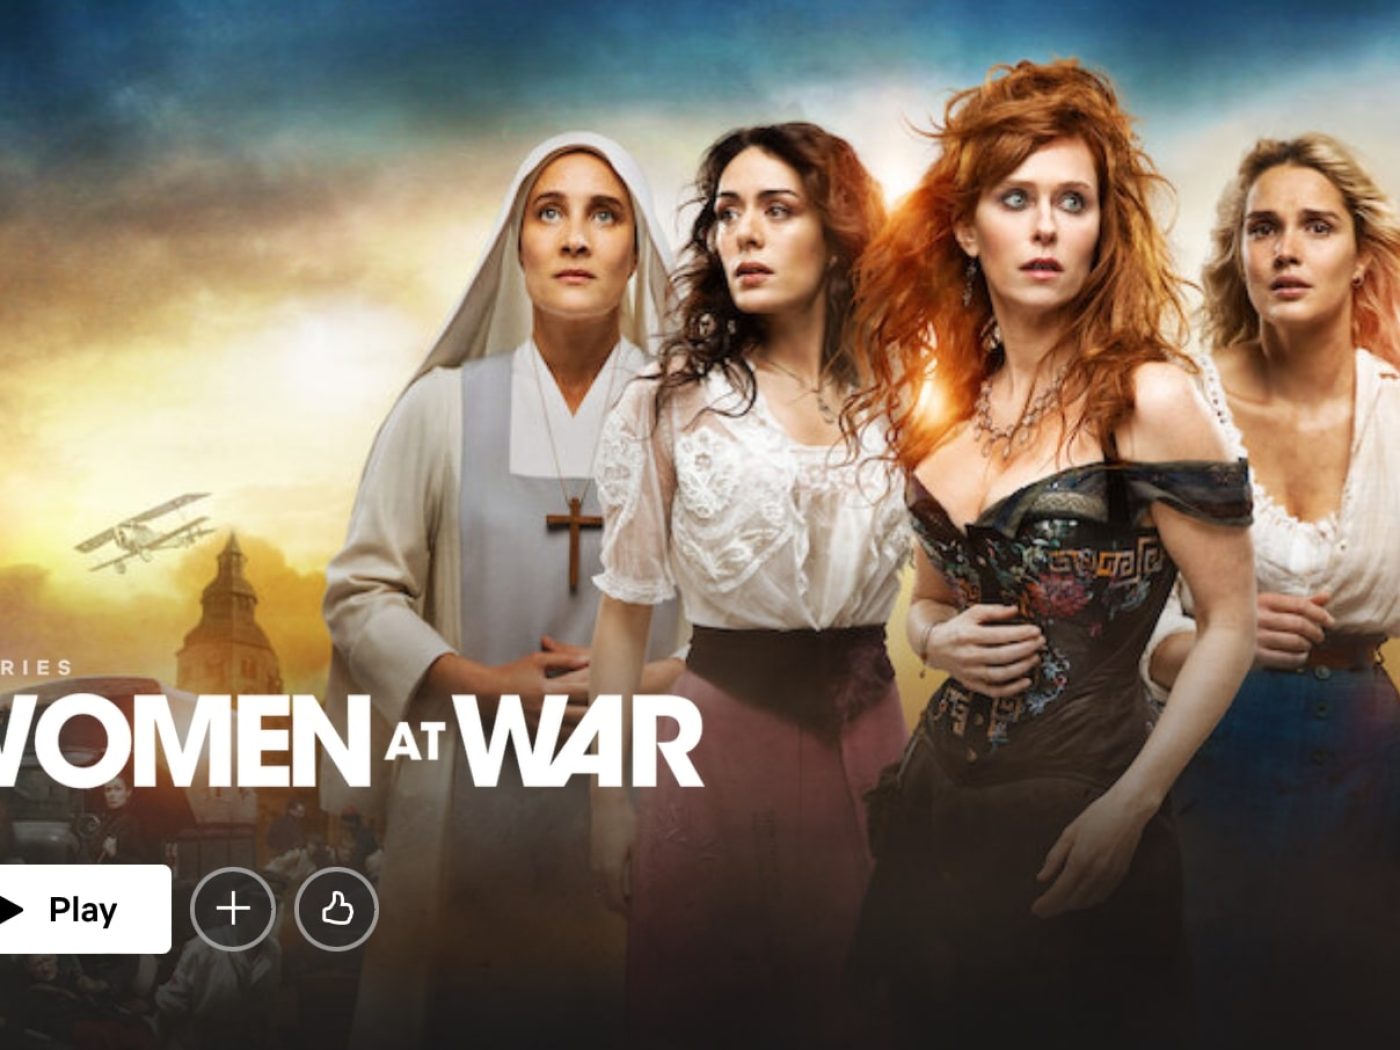 Netflix's new WWI drama Women at War is one of the top series in the US